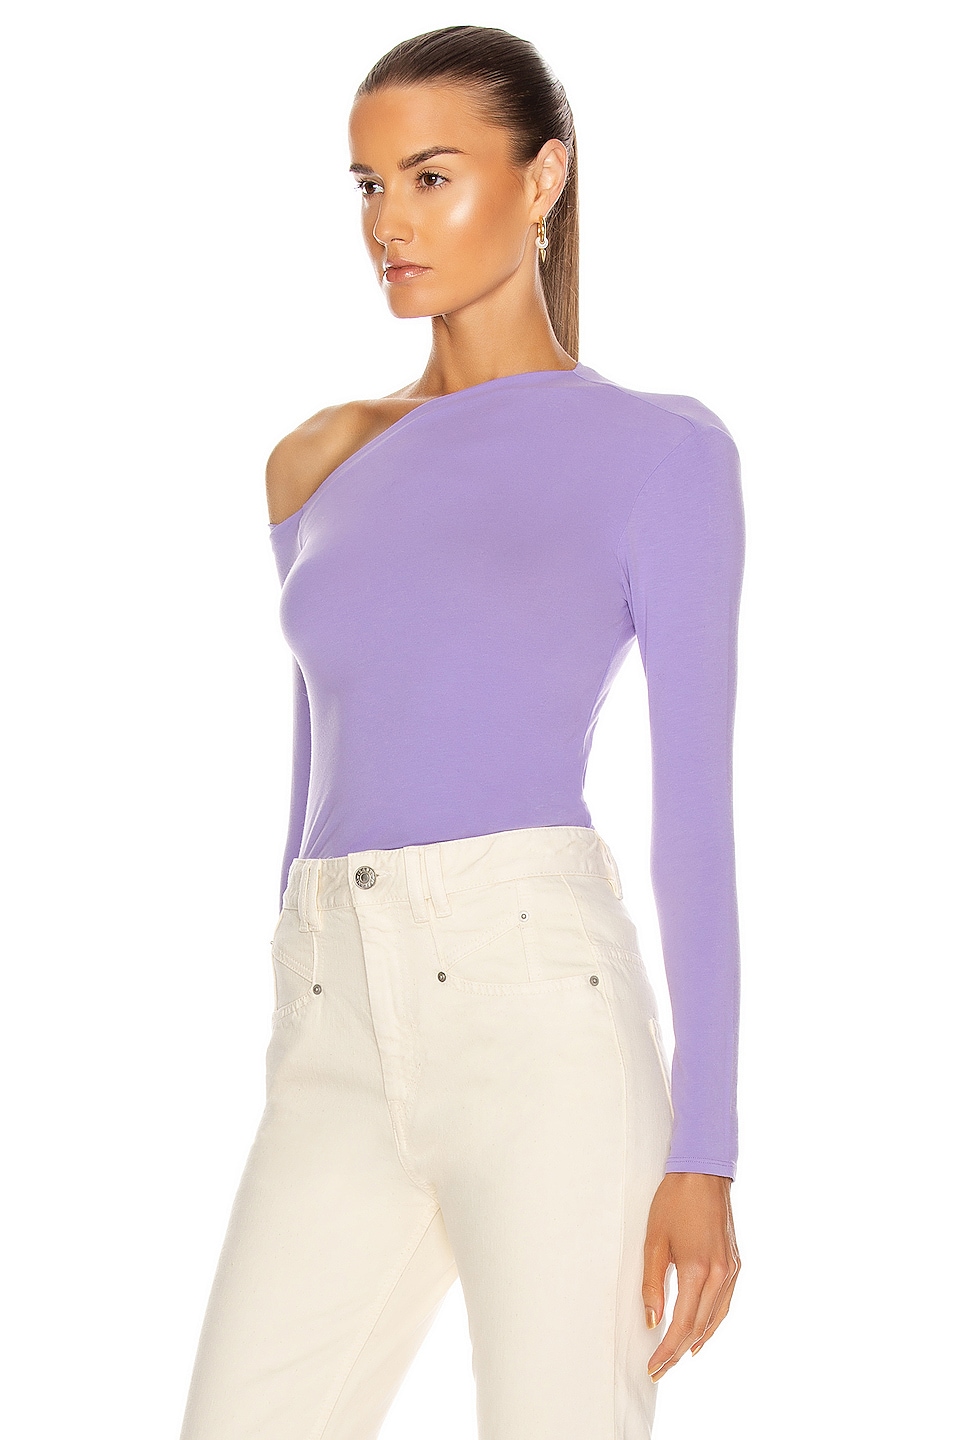 Enza Costa Angled Exposed Shoulder Long Sleeve in Lavender | FWRD